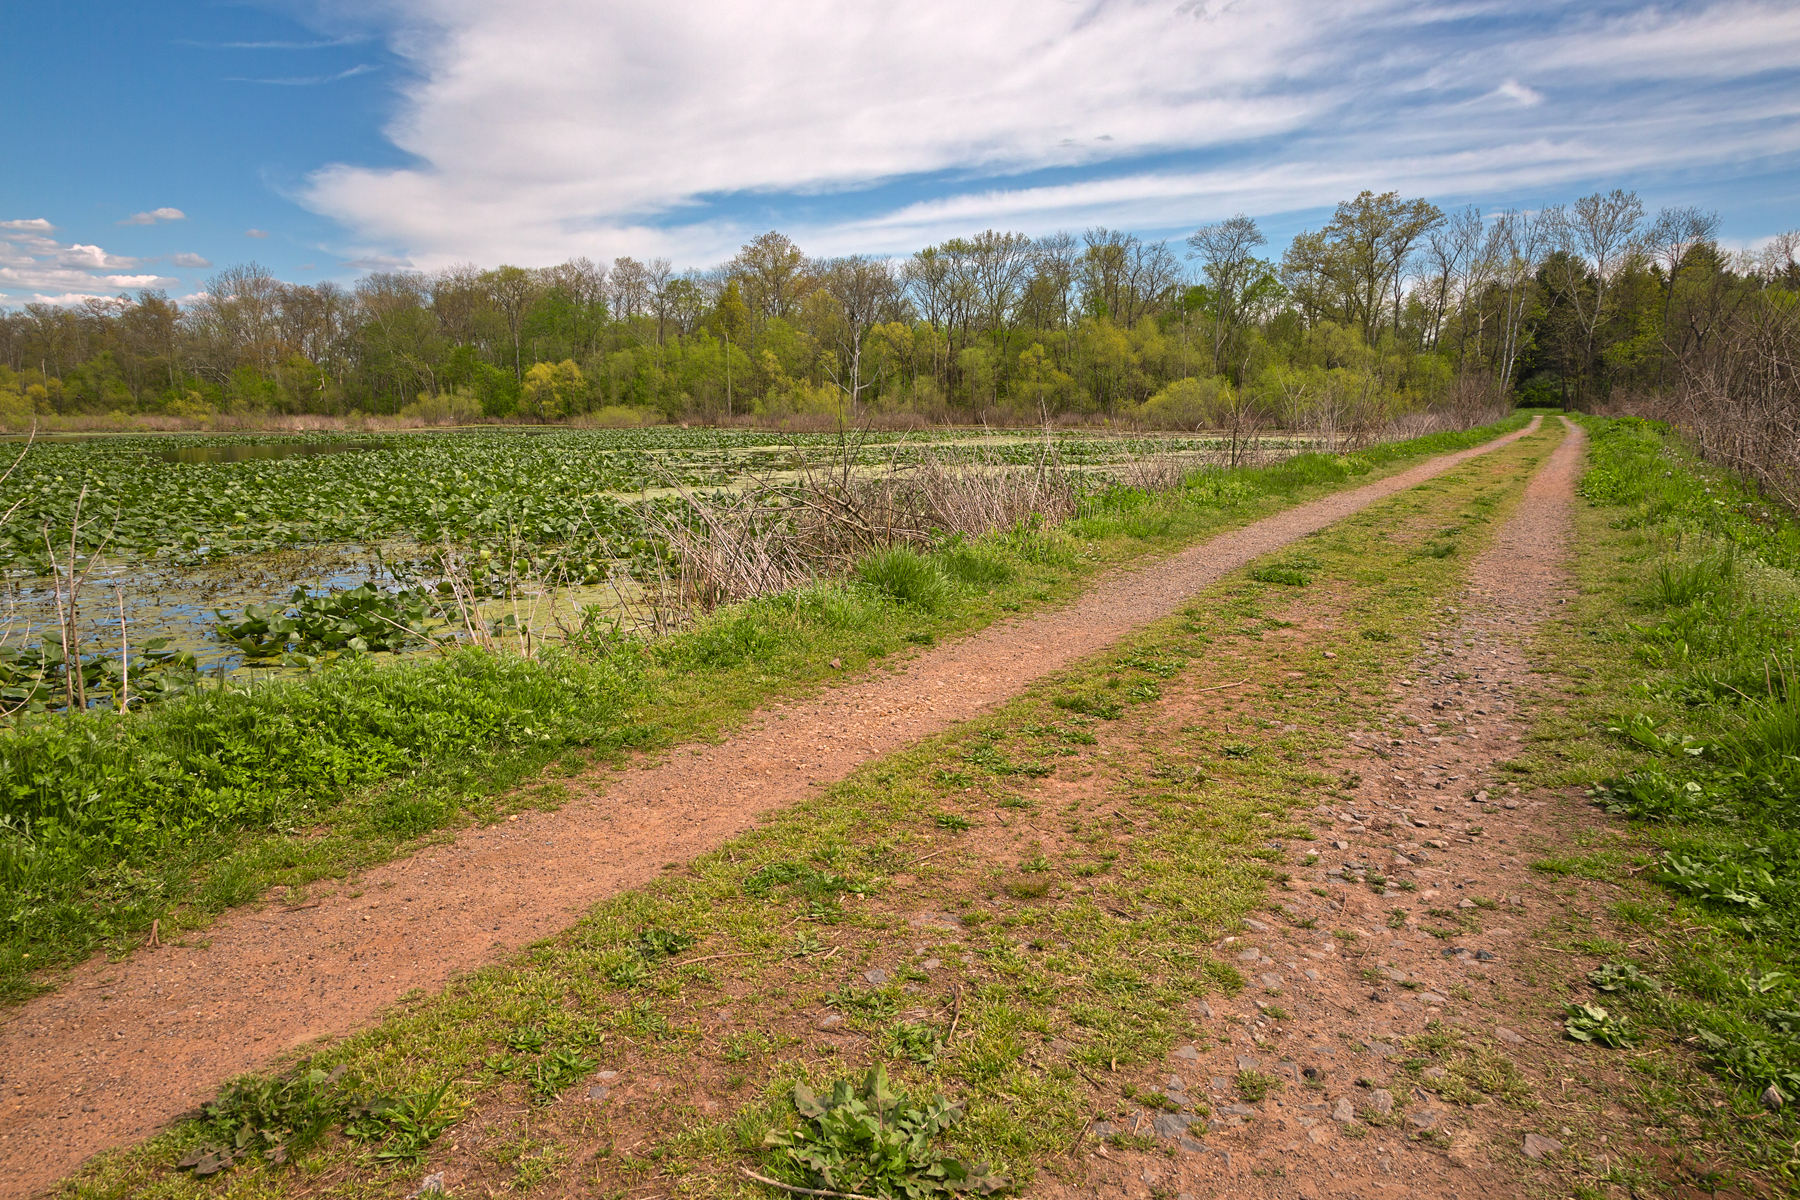 Mckee-beshers trail - hdr photo